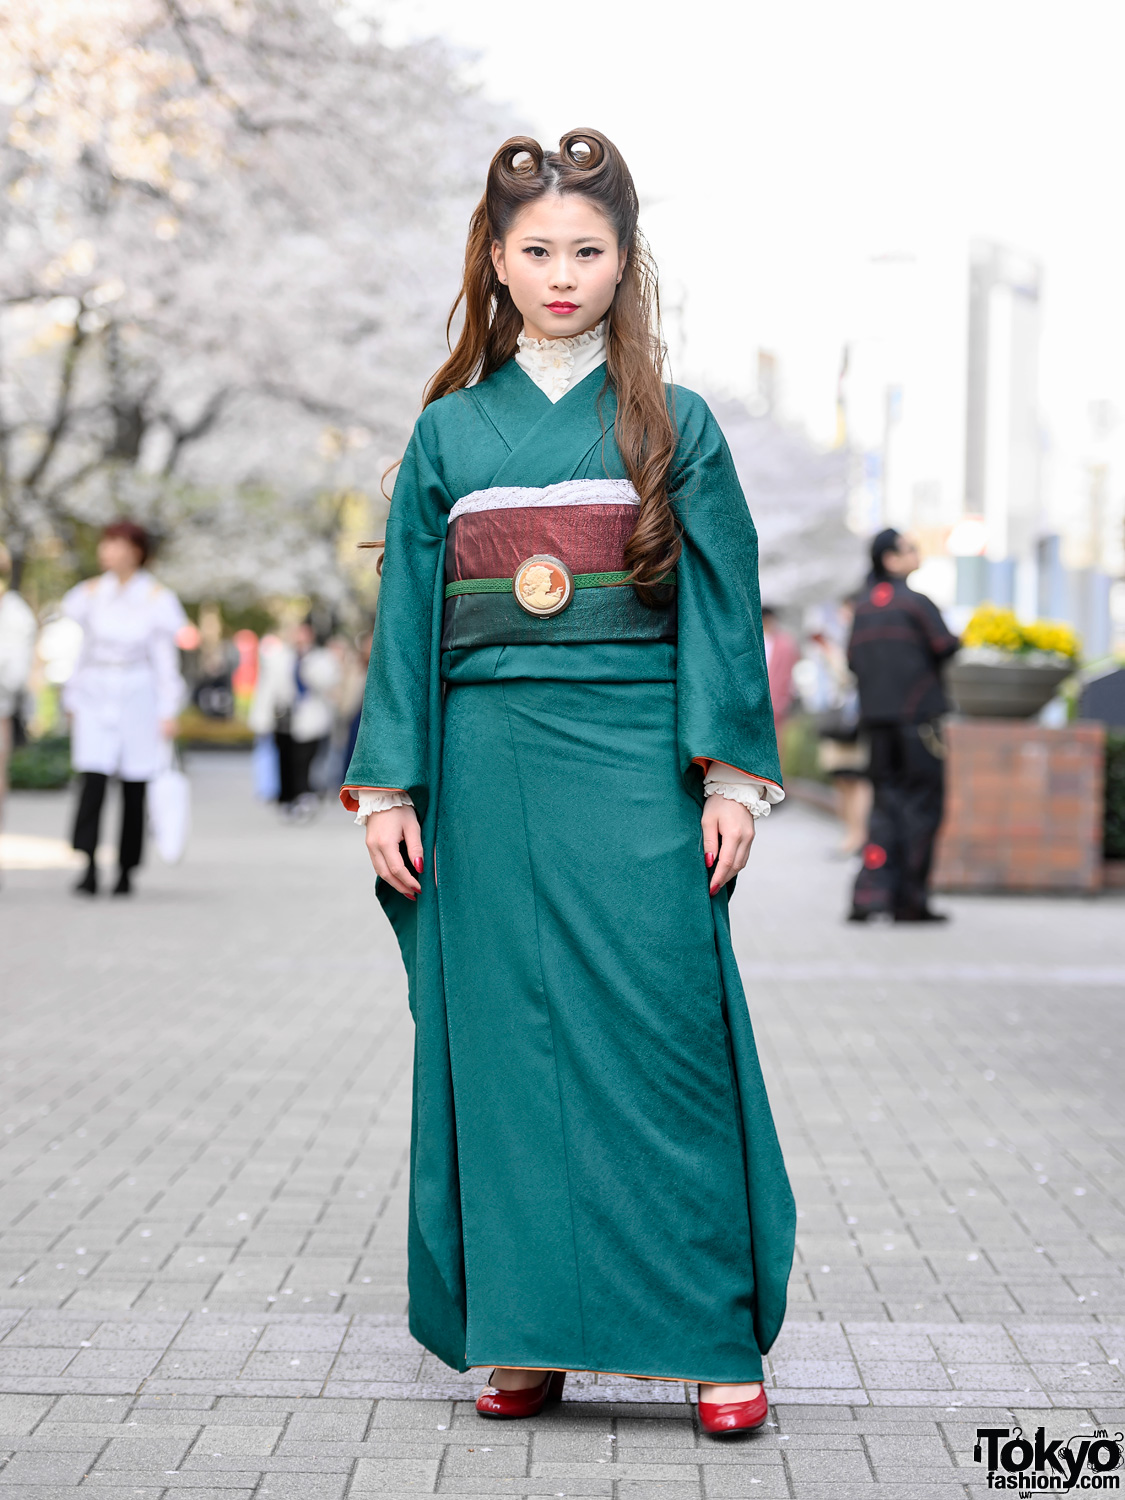 Vintage Japanese Kimono & Victory Rolls Hairstyle Street Style at Bunka Fashion College in Tokyo